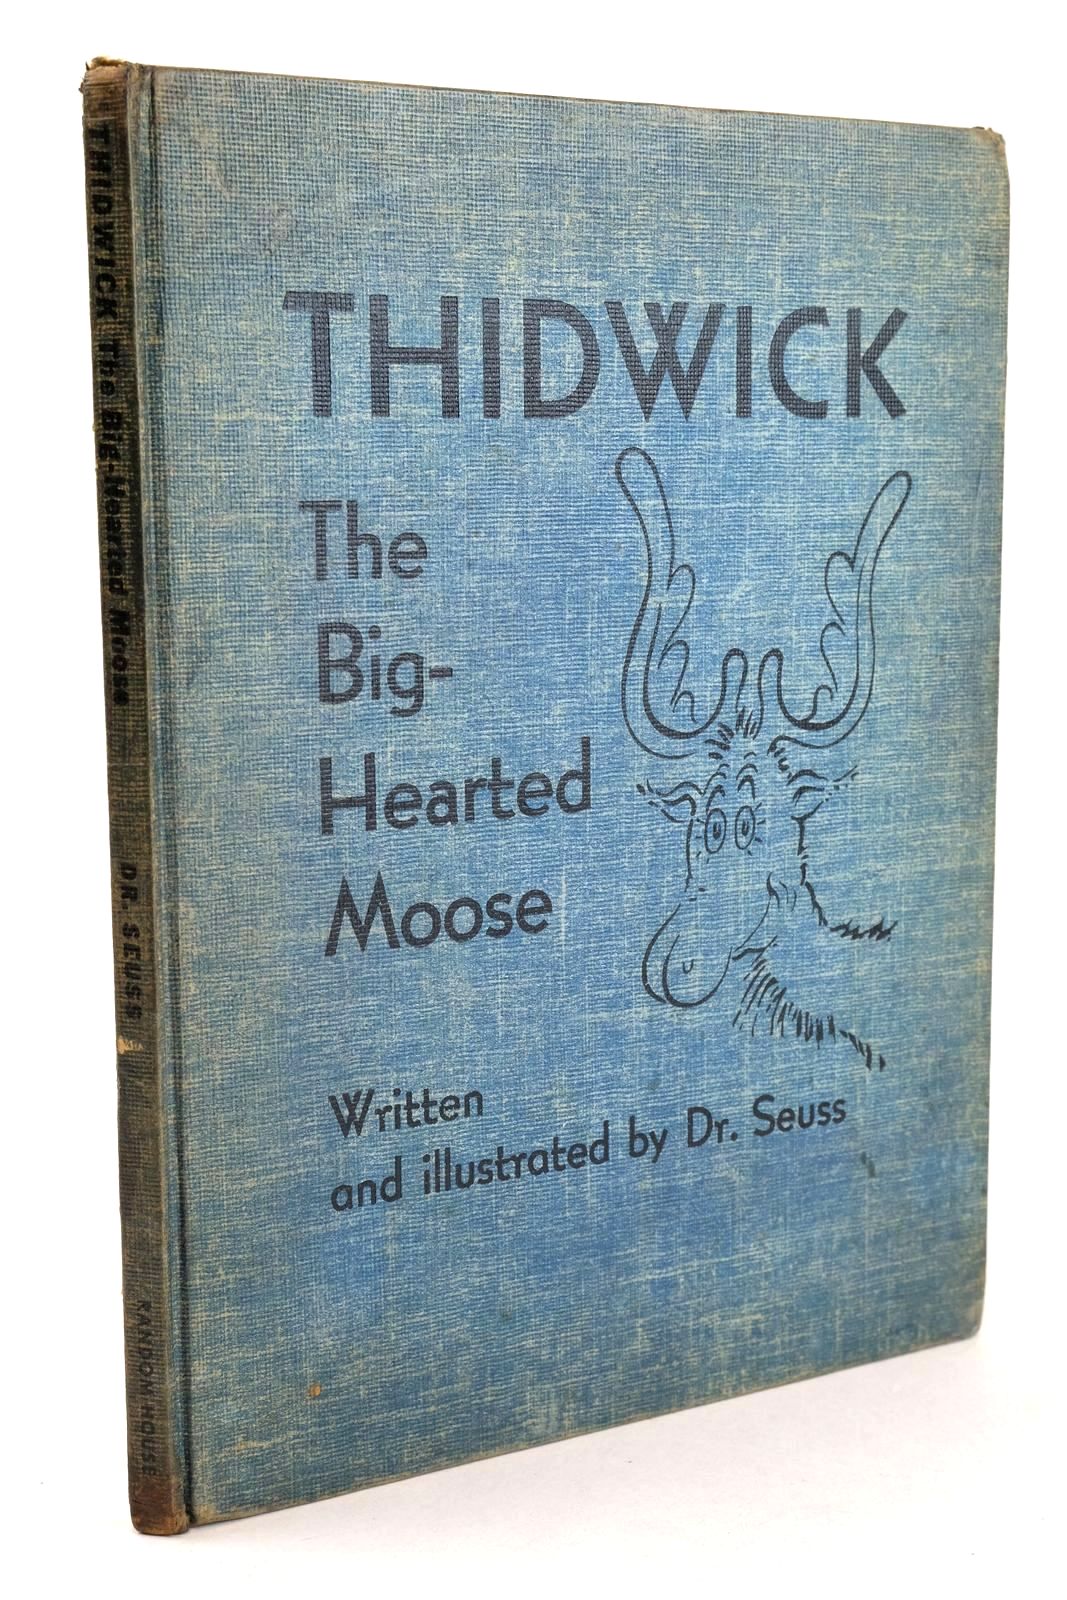 Photo of THIDWICK THE BIG-HEARTED MOOSE- Stock Number: 1326309